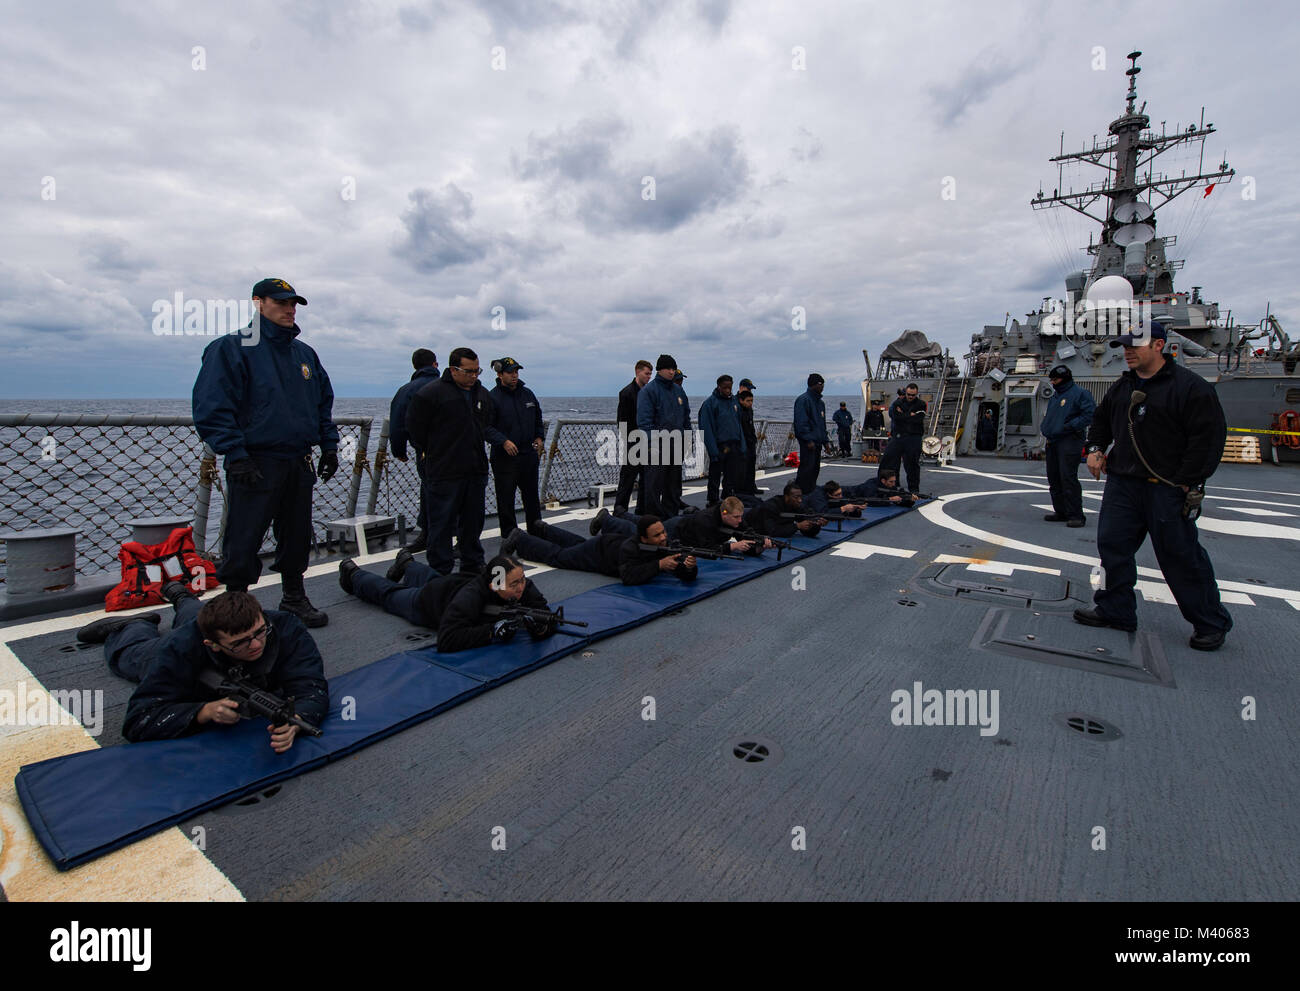 180206-N-RG482-016  ADRIATIC SEA (Feb. 6, 2018) Gunner's Mate 1st Class Gregory Bissett, far right, conducts weapon safety and familiarization training during a small-arms gun shoot aboard the Arleigh Burke-class guided-missile destroyer USS Ross (DDG 71). Ross, forward-deployed to Rota, Spain, is on its sixth patrol in the U.S. 6th Fleet area of operations in support of regional allies and partners and U.S. national security interests in Europe. (U.S. Navy photo by Mass Communication Specialist 1st Class Kyle Steckler/Released) Stock Photo